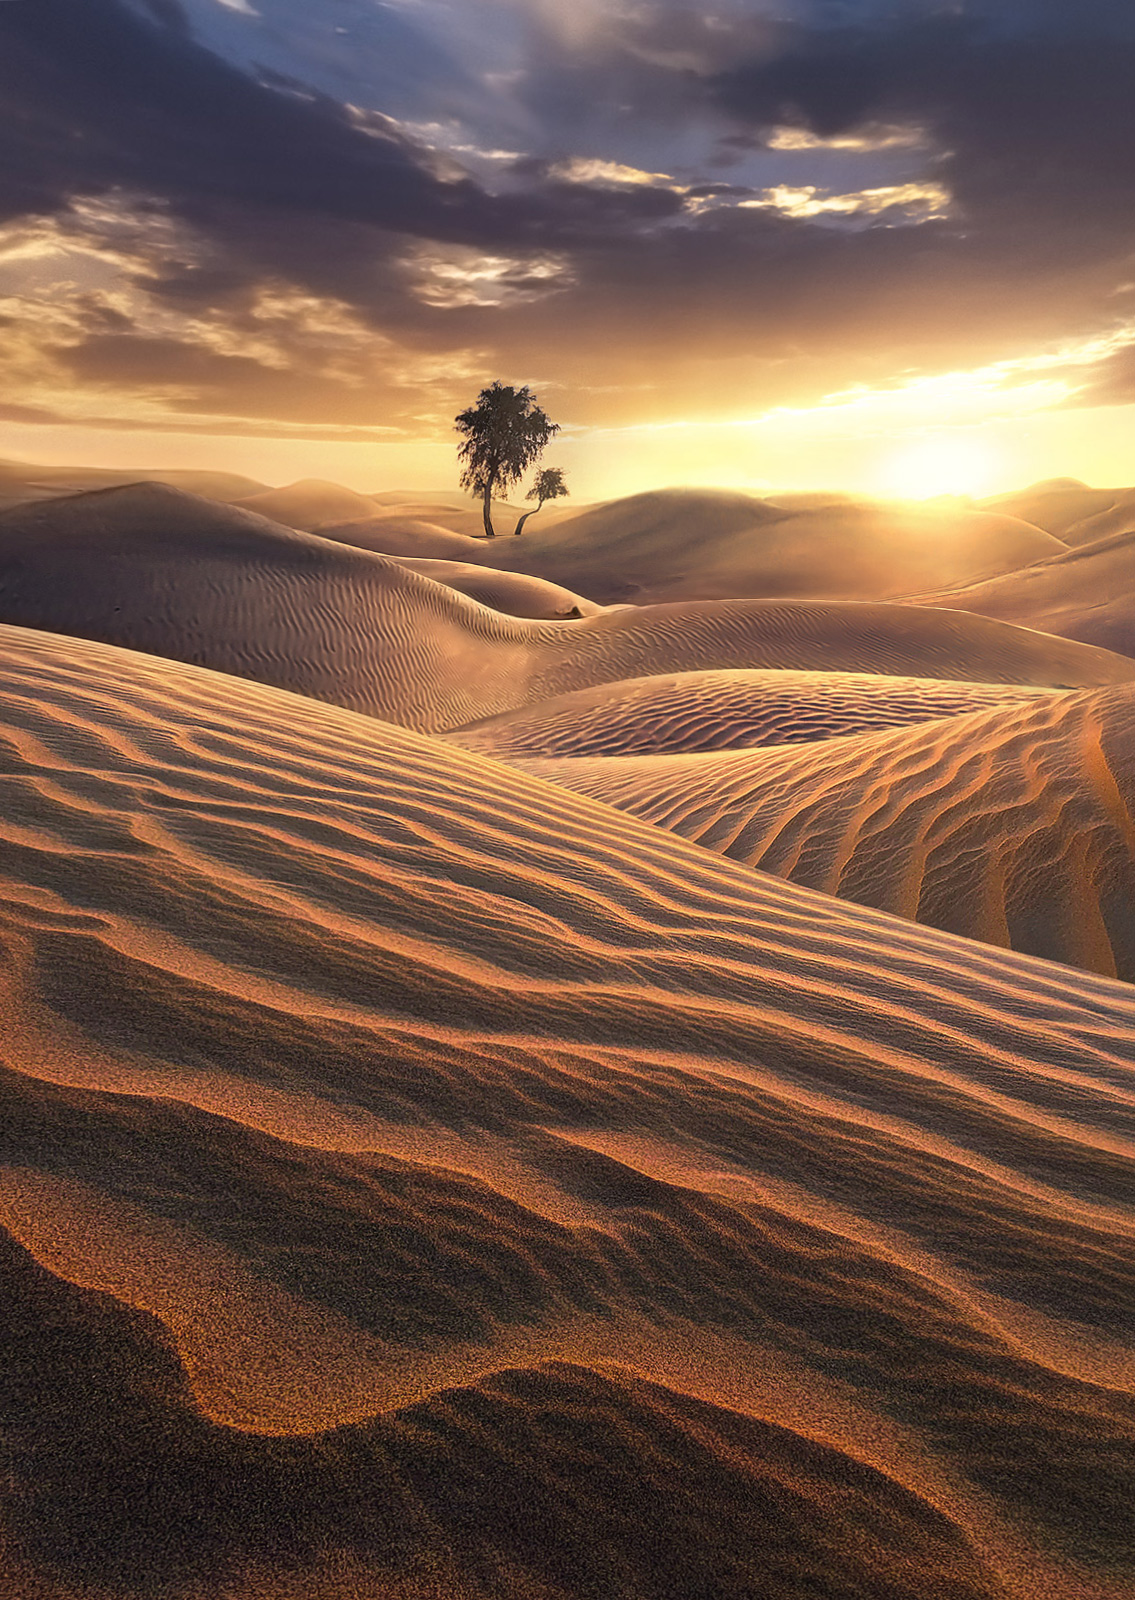 The most beautiful dunes in the world are in the UAE.  The reds mixed with gold, yellow and the colors of sunrise gives great...